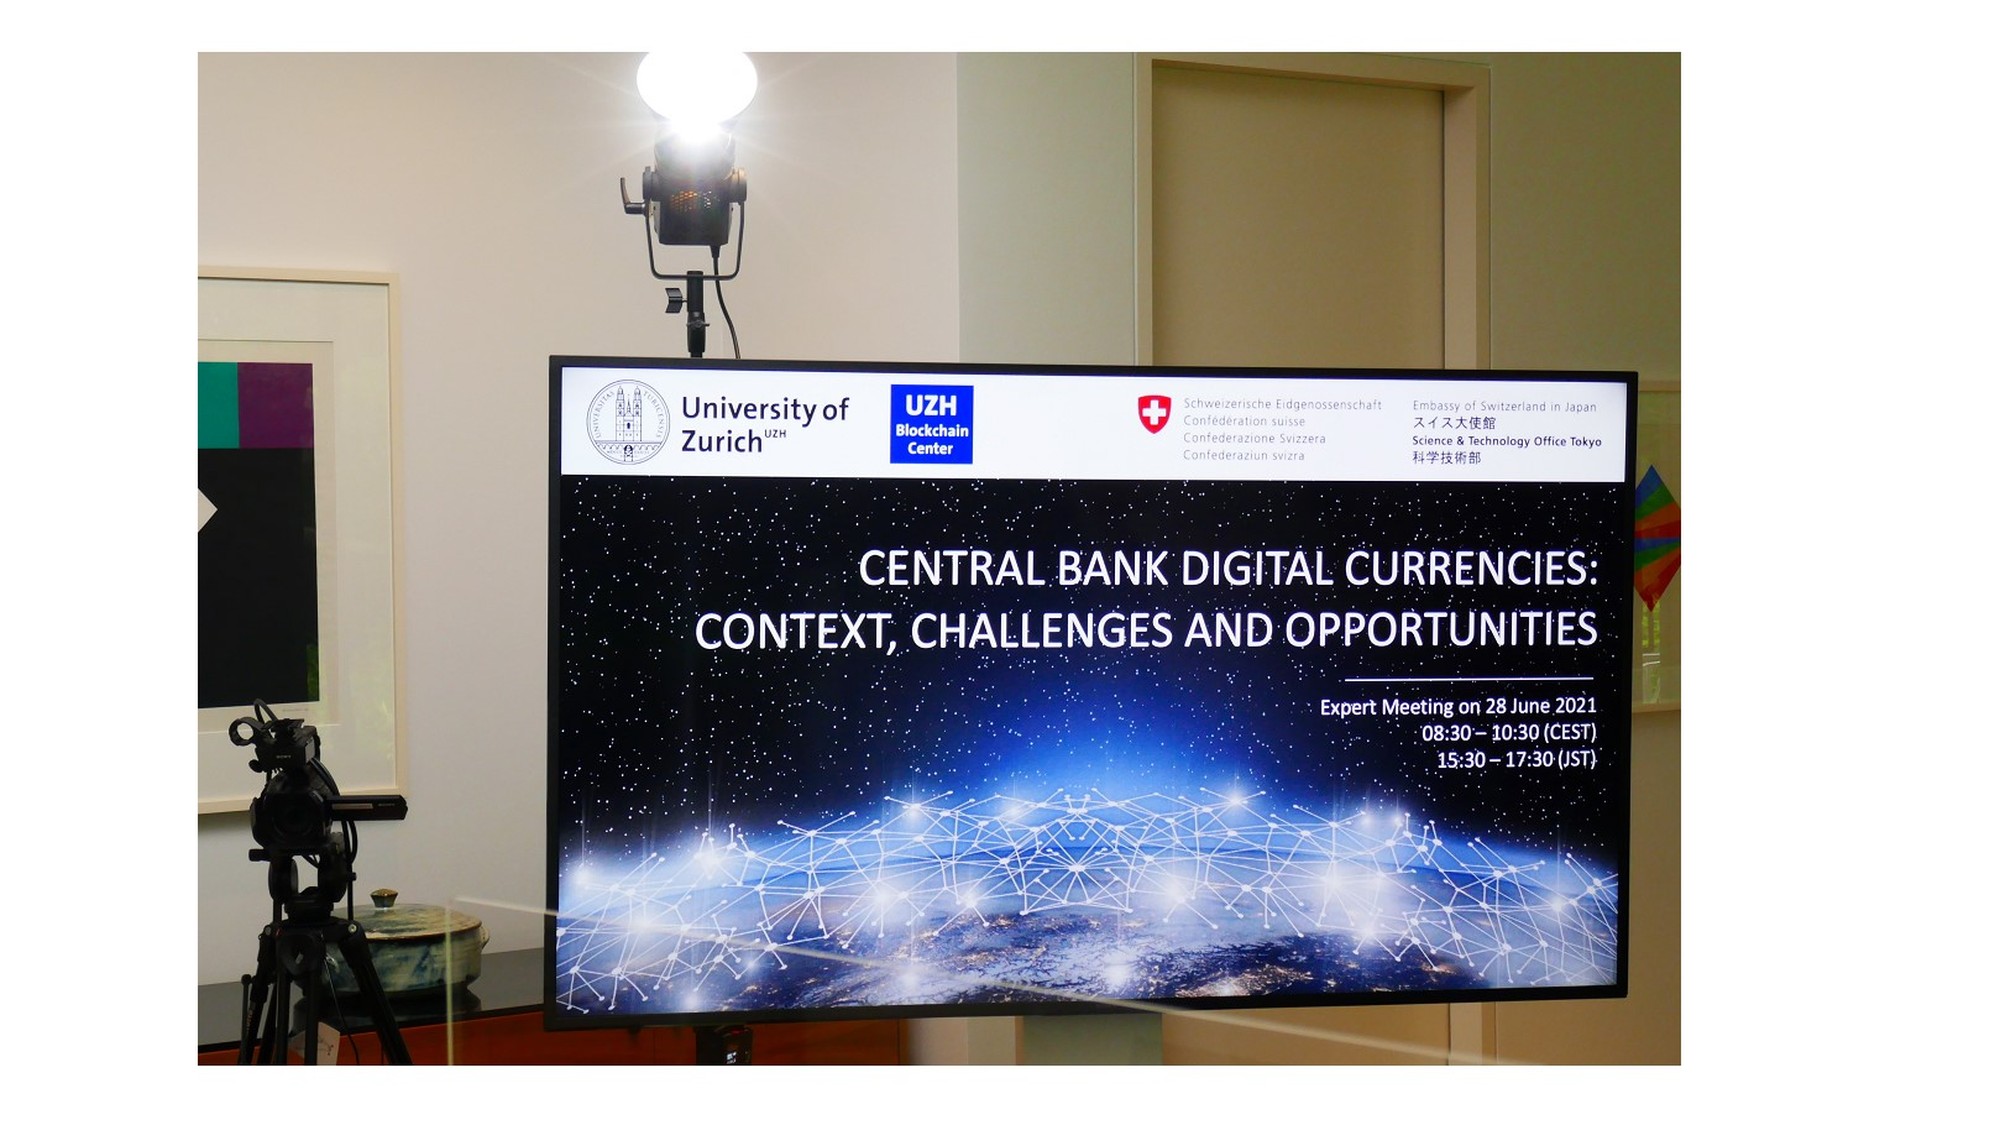 Legend: Experts exchanged on Central Bank Digital Currencies connecting Zurich and Tokyo. Photo by: S&T Office Tokyo